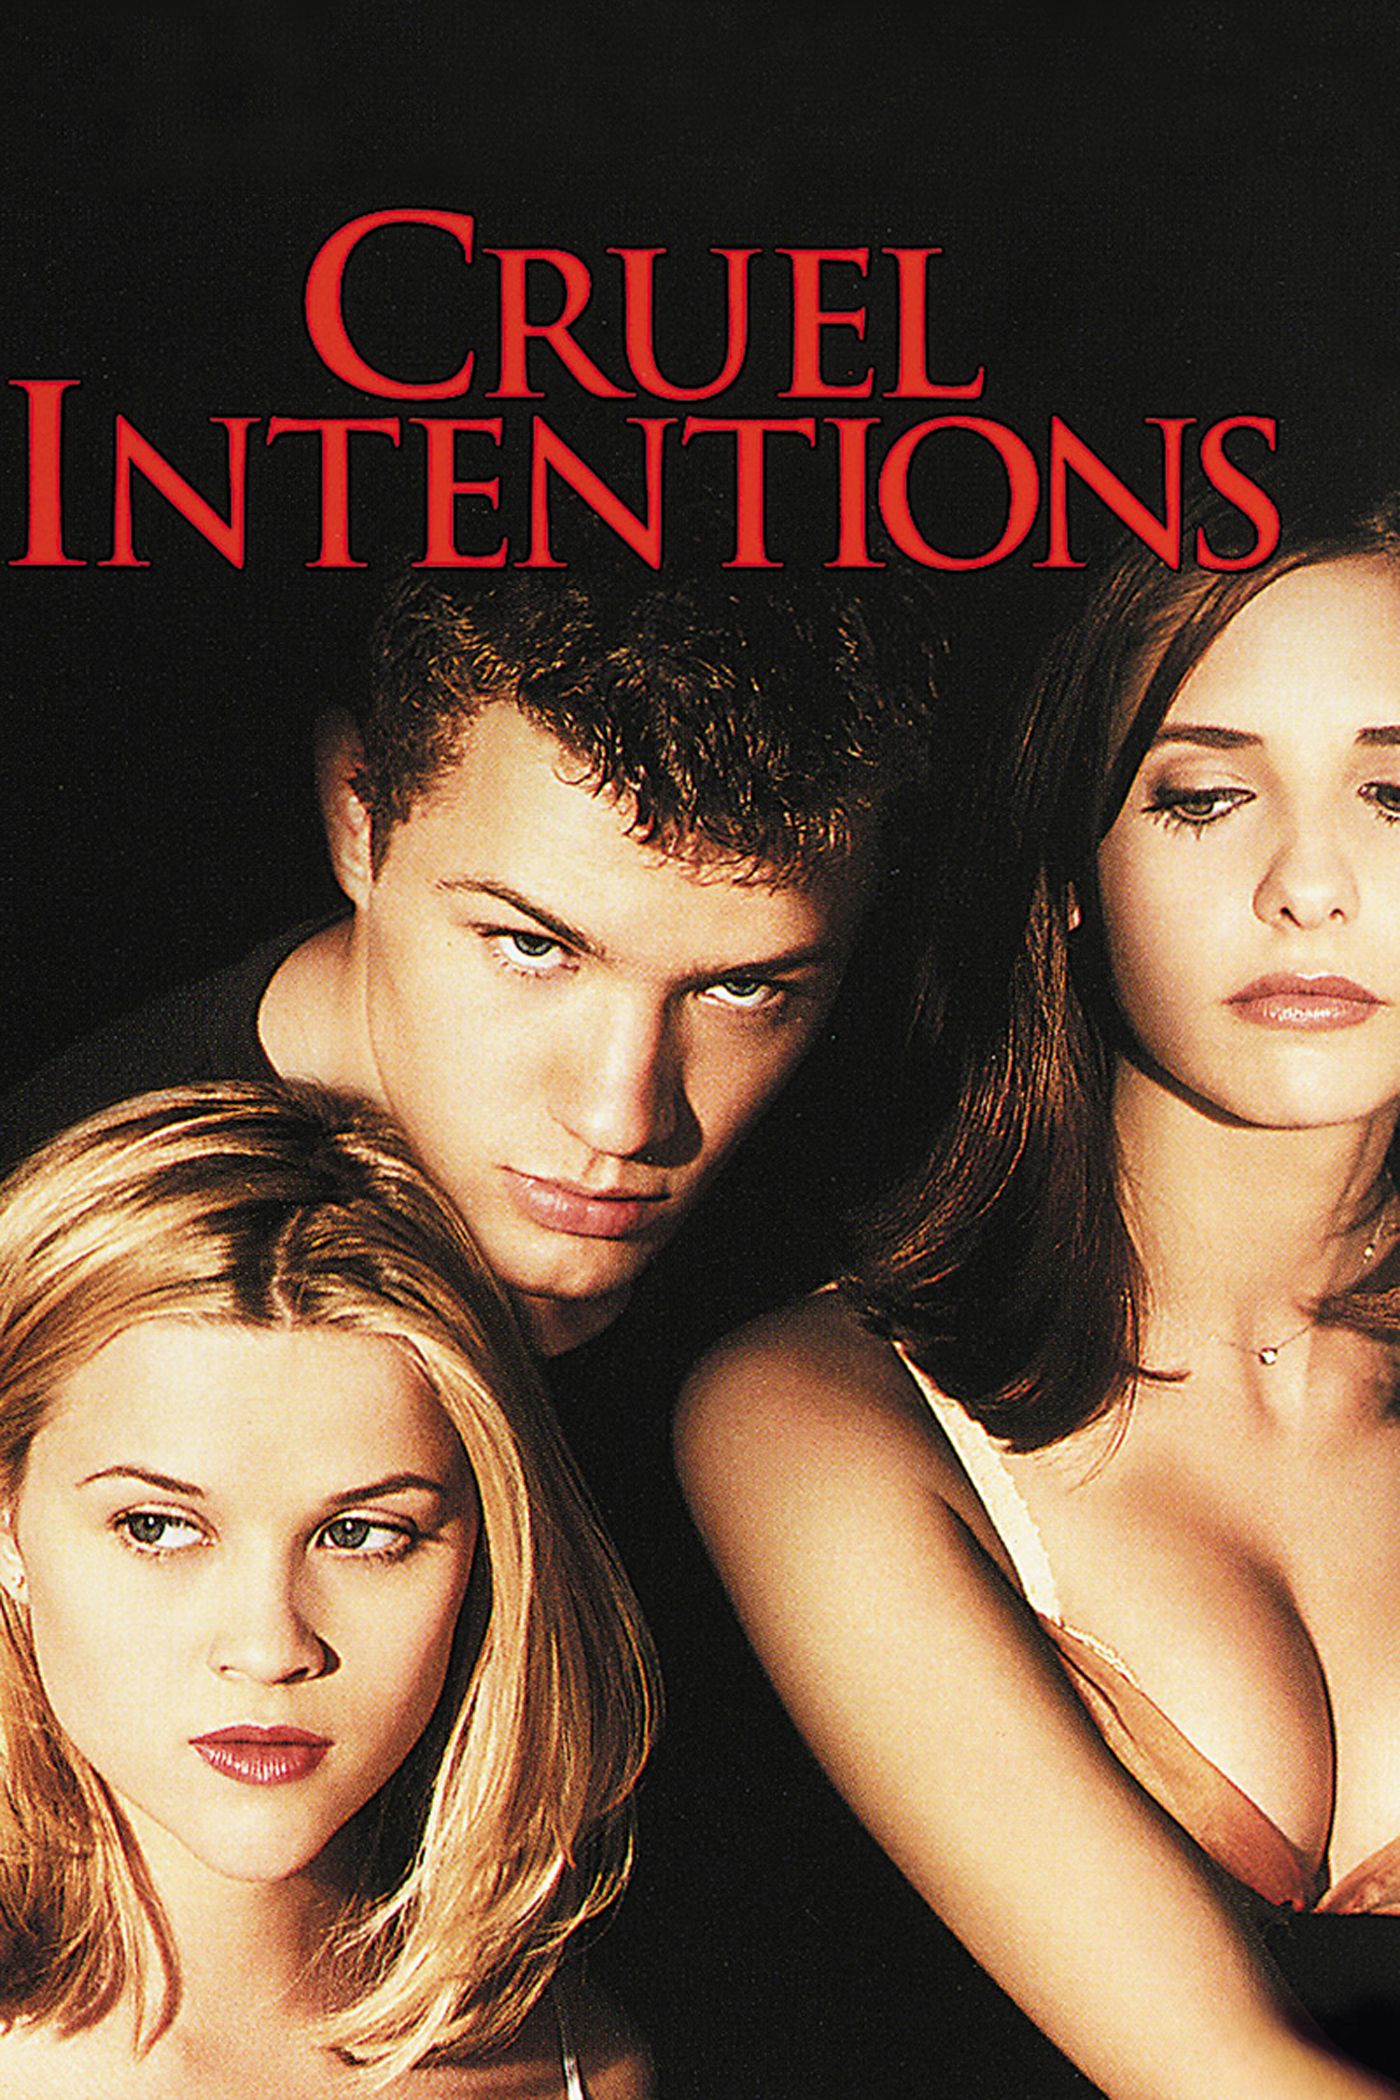 chad ladner recommends cruel intentions movie online pic